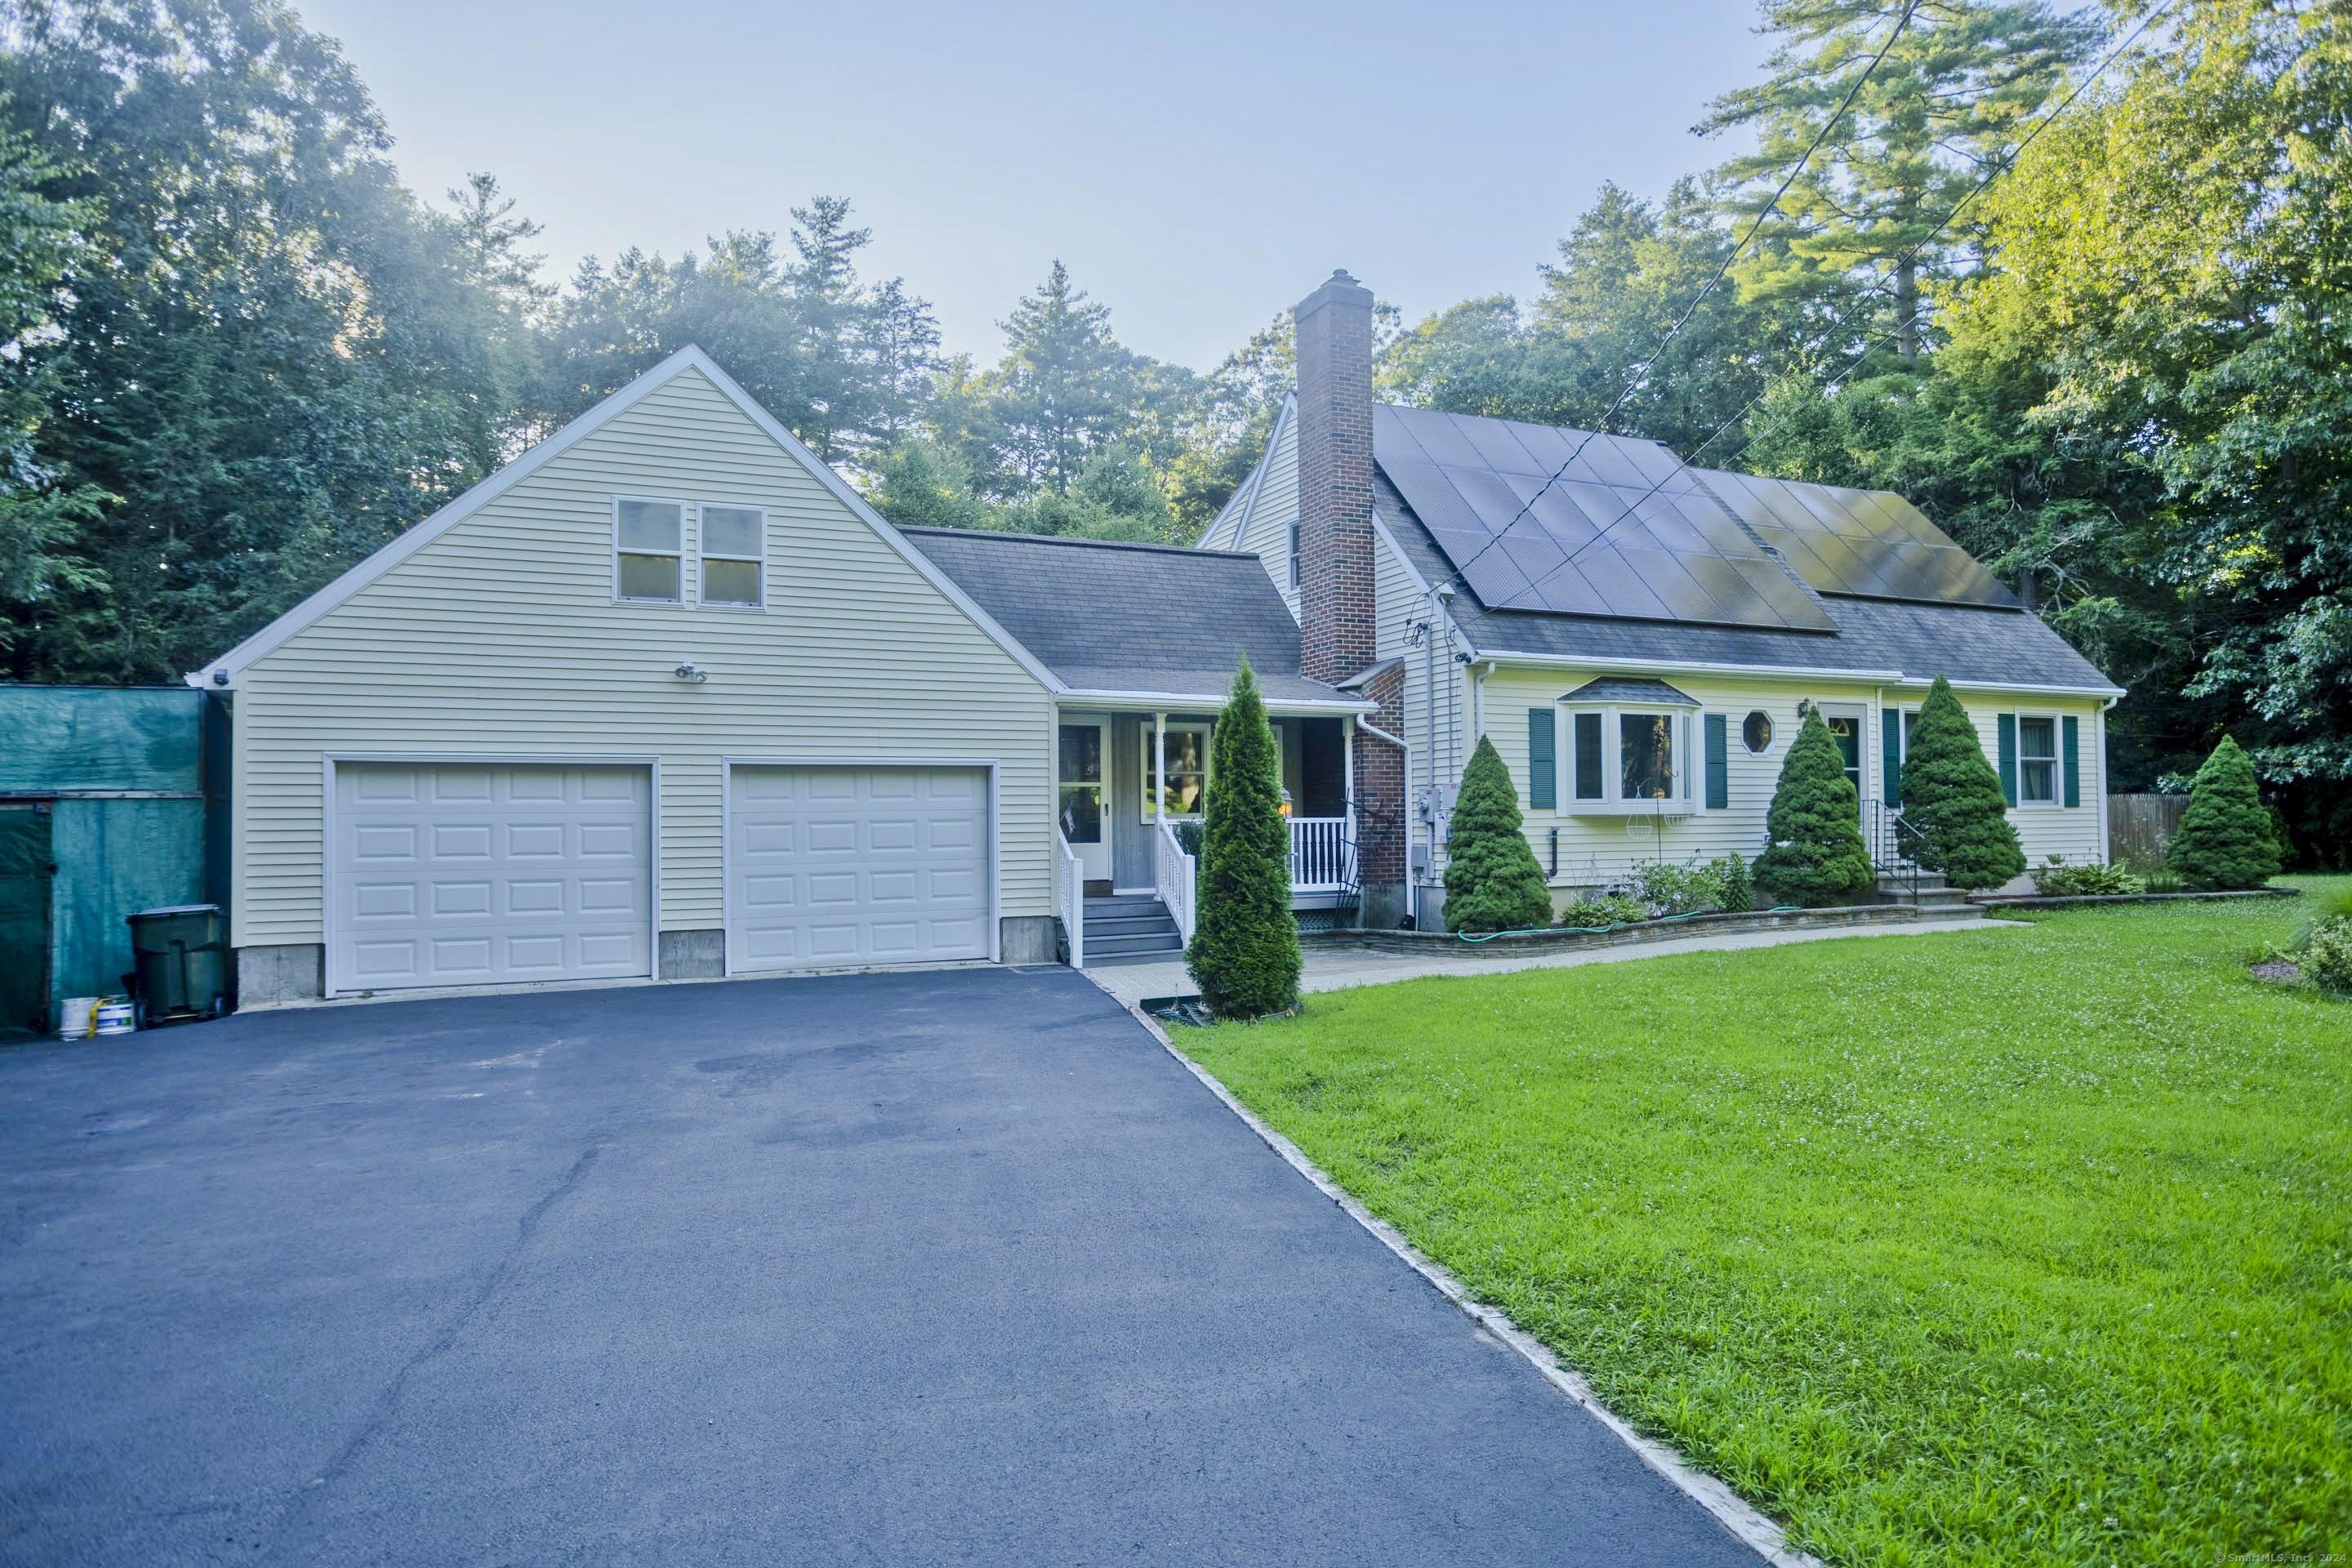 51 Old Stagecoach Road Granby CT